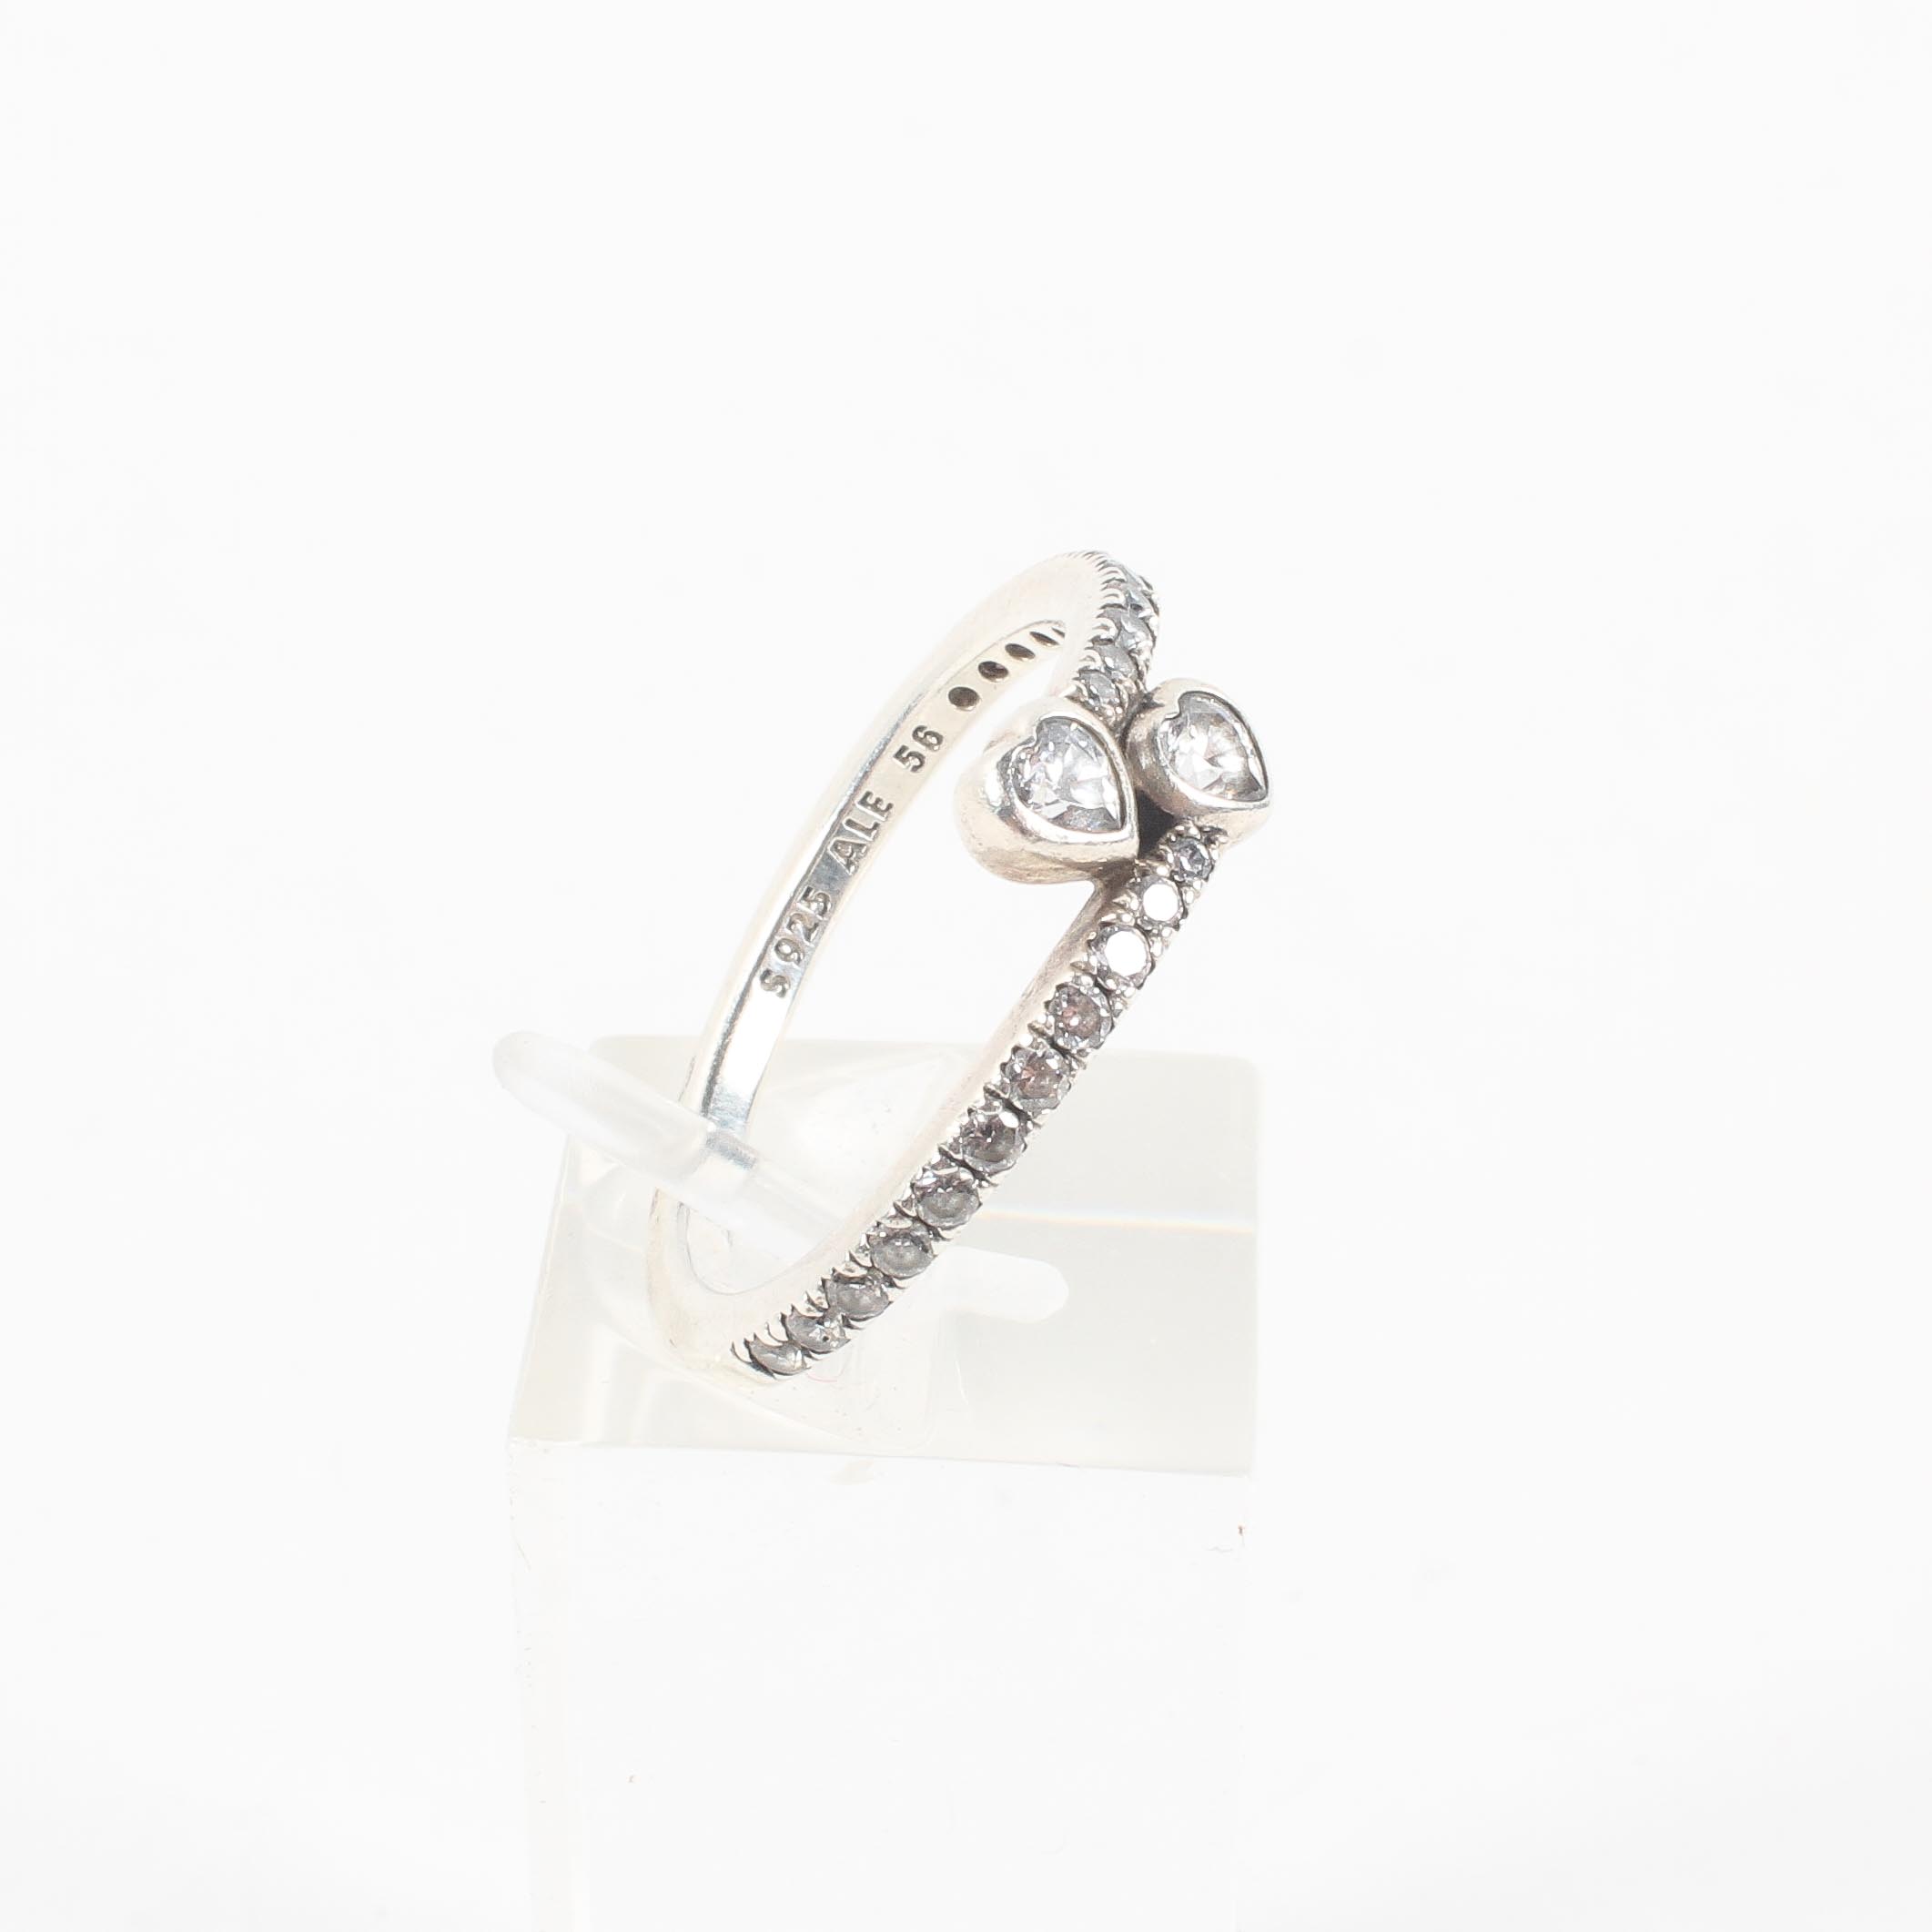 A sterling silver crossover ring set with heart and round cut colourless cubic zirconia.